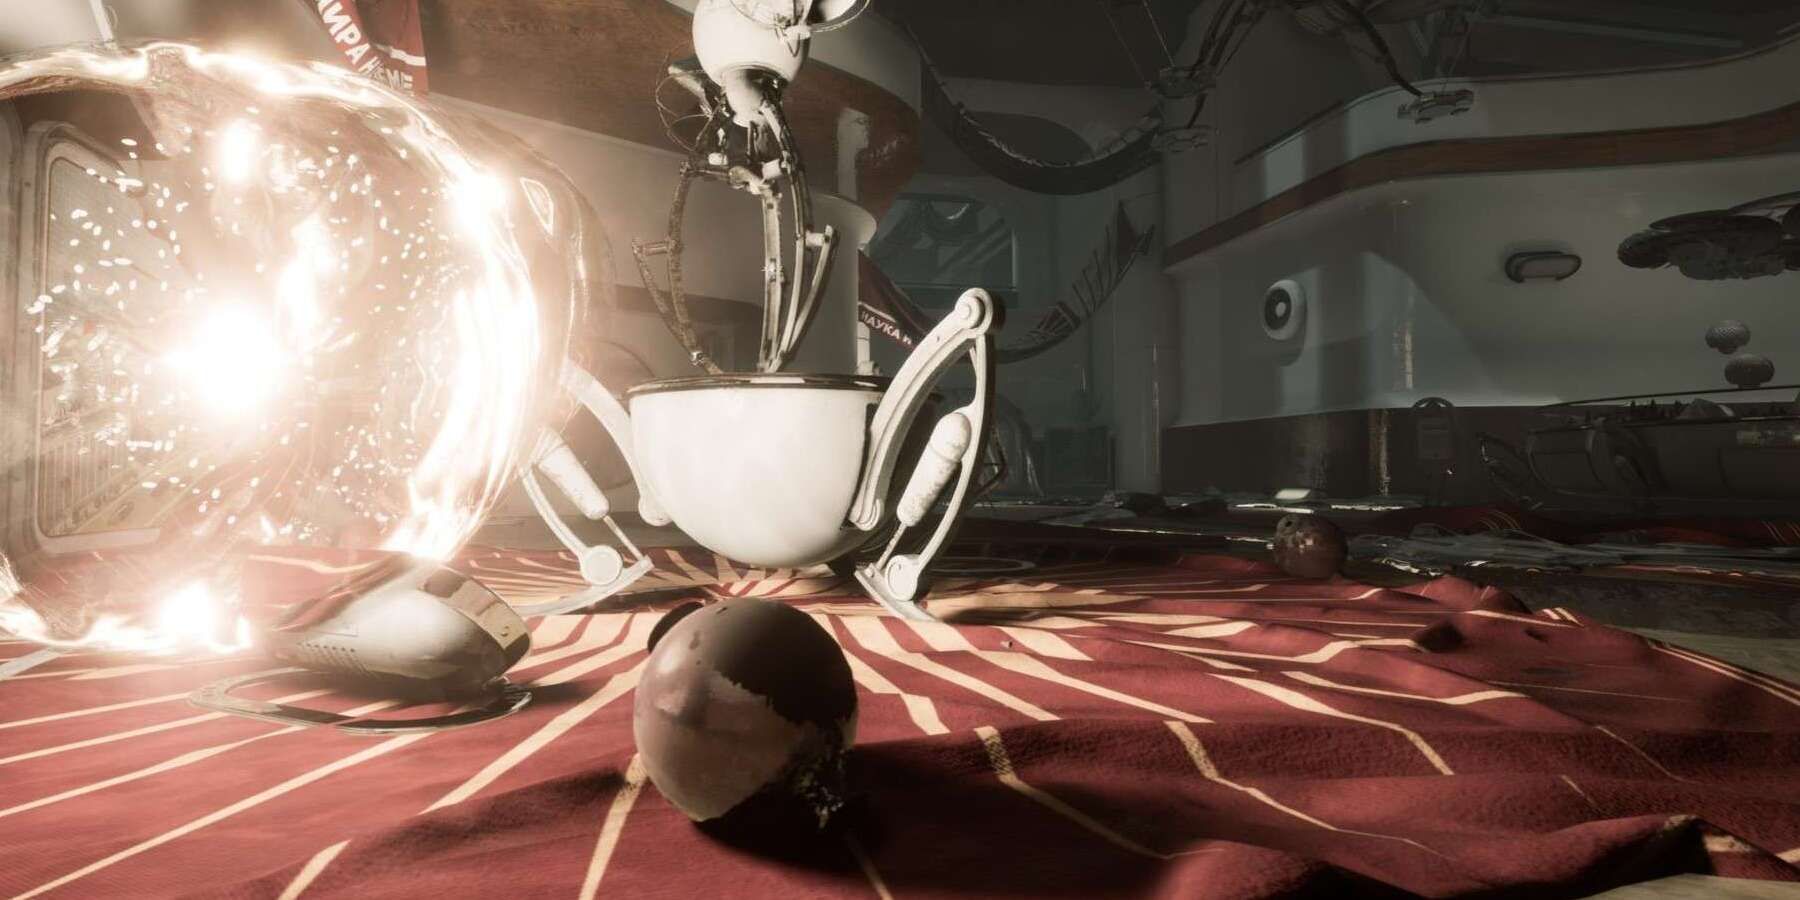 Atomic Heart DLC Will Be Entirely Single-Player, Story-Focused